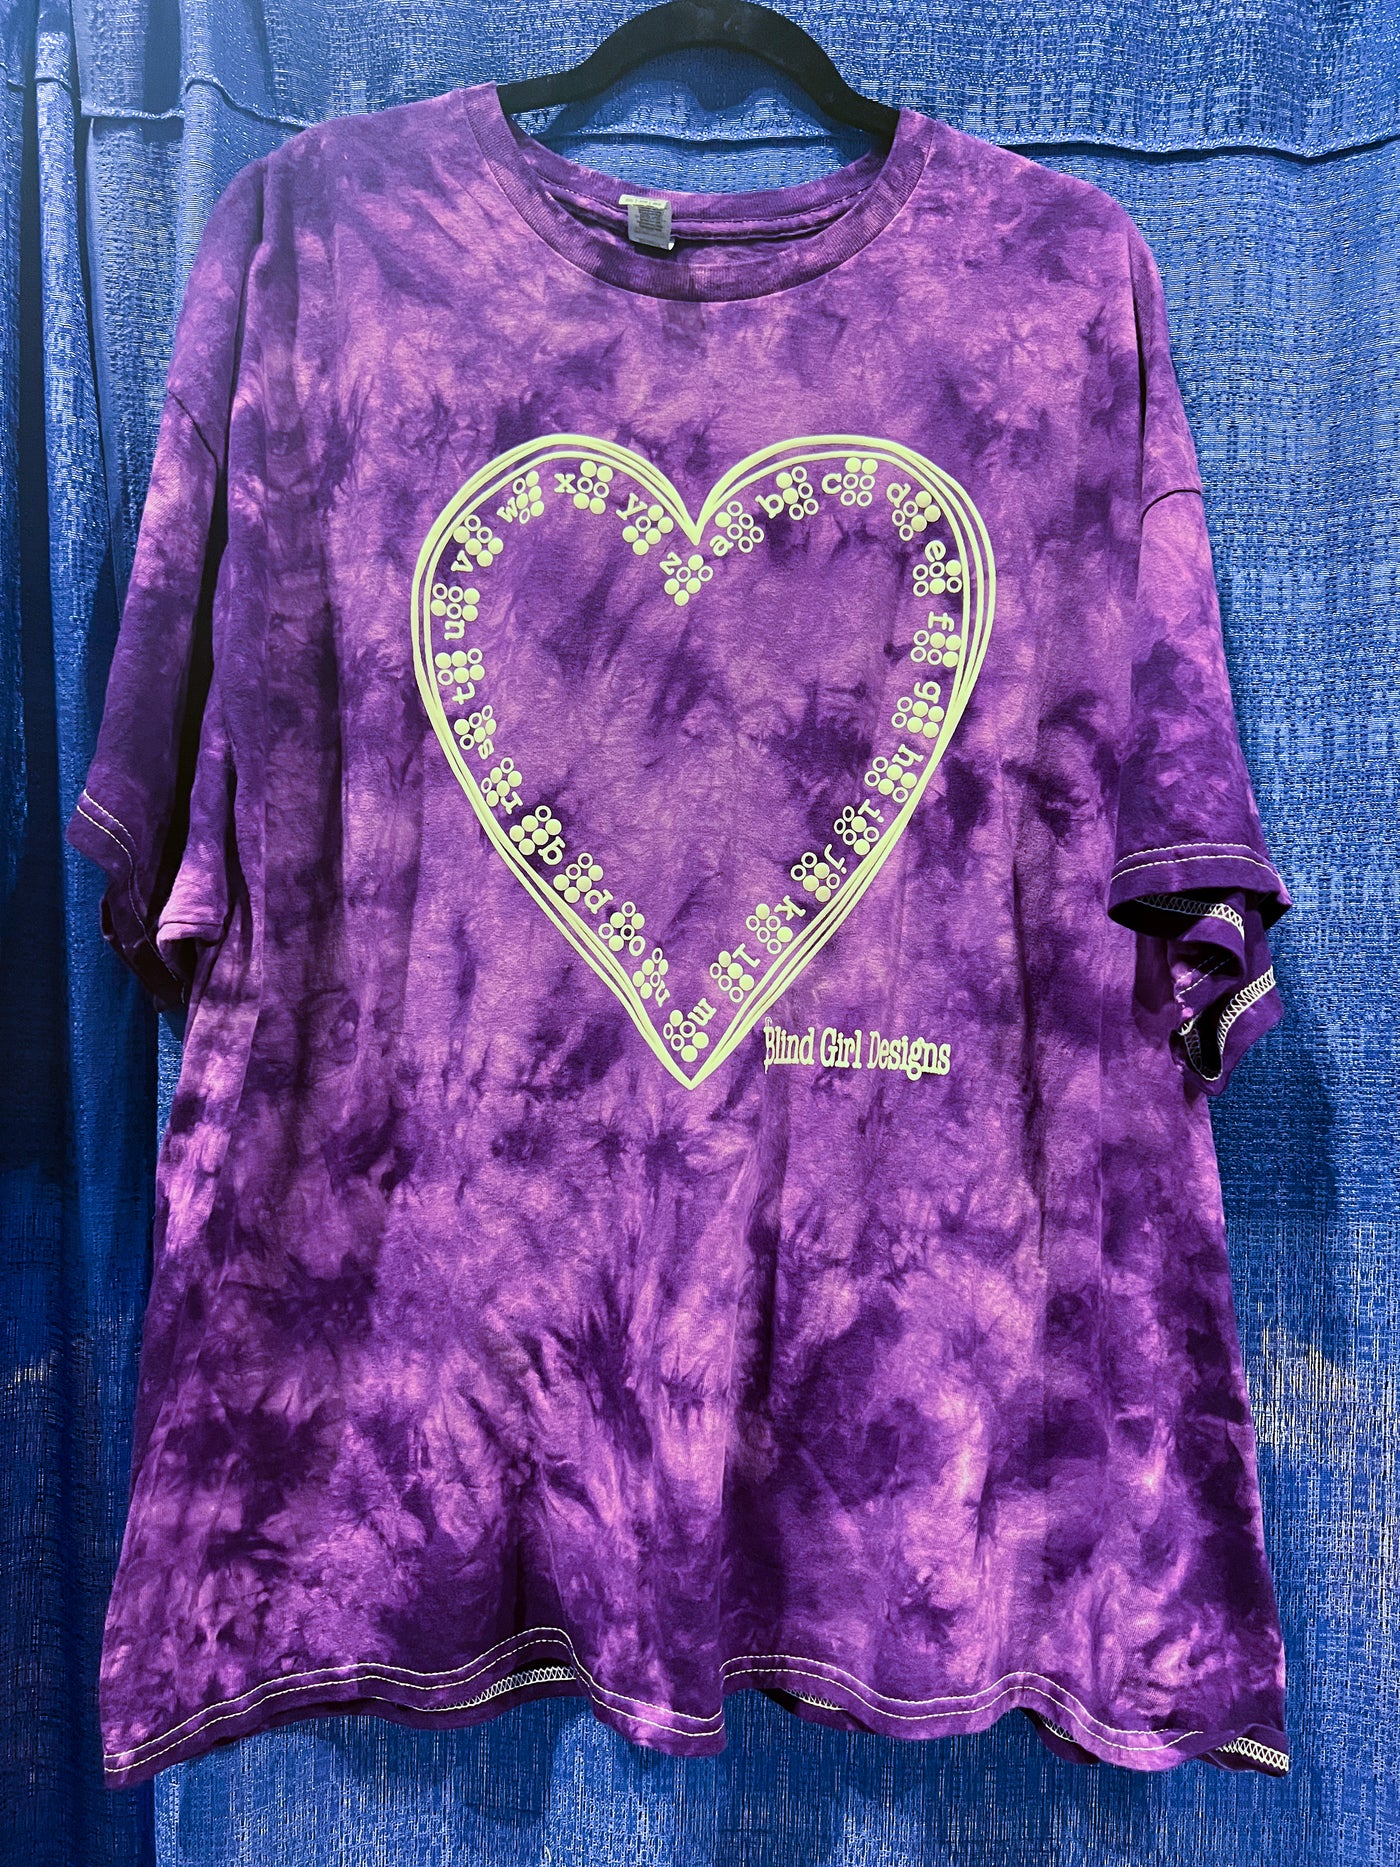 This dark and light purple tie-dye shirt features the Braille ABCs lining the inside of a hand-drawn heart. It has both the letters and the letters in Braille, which forms a beautiful pattern! It's printed in our puff ink so that it is tactile!